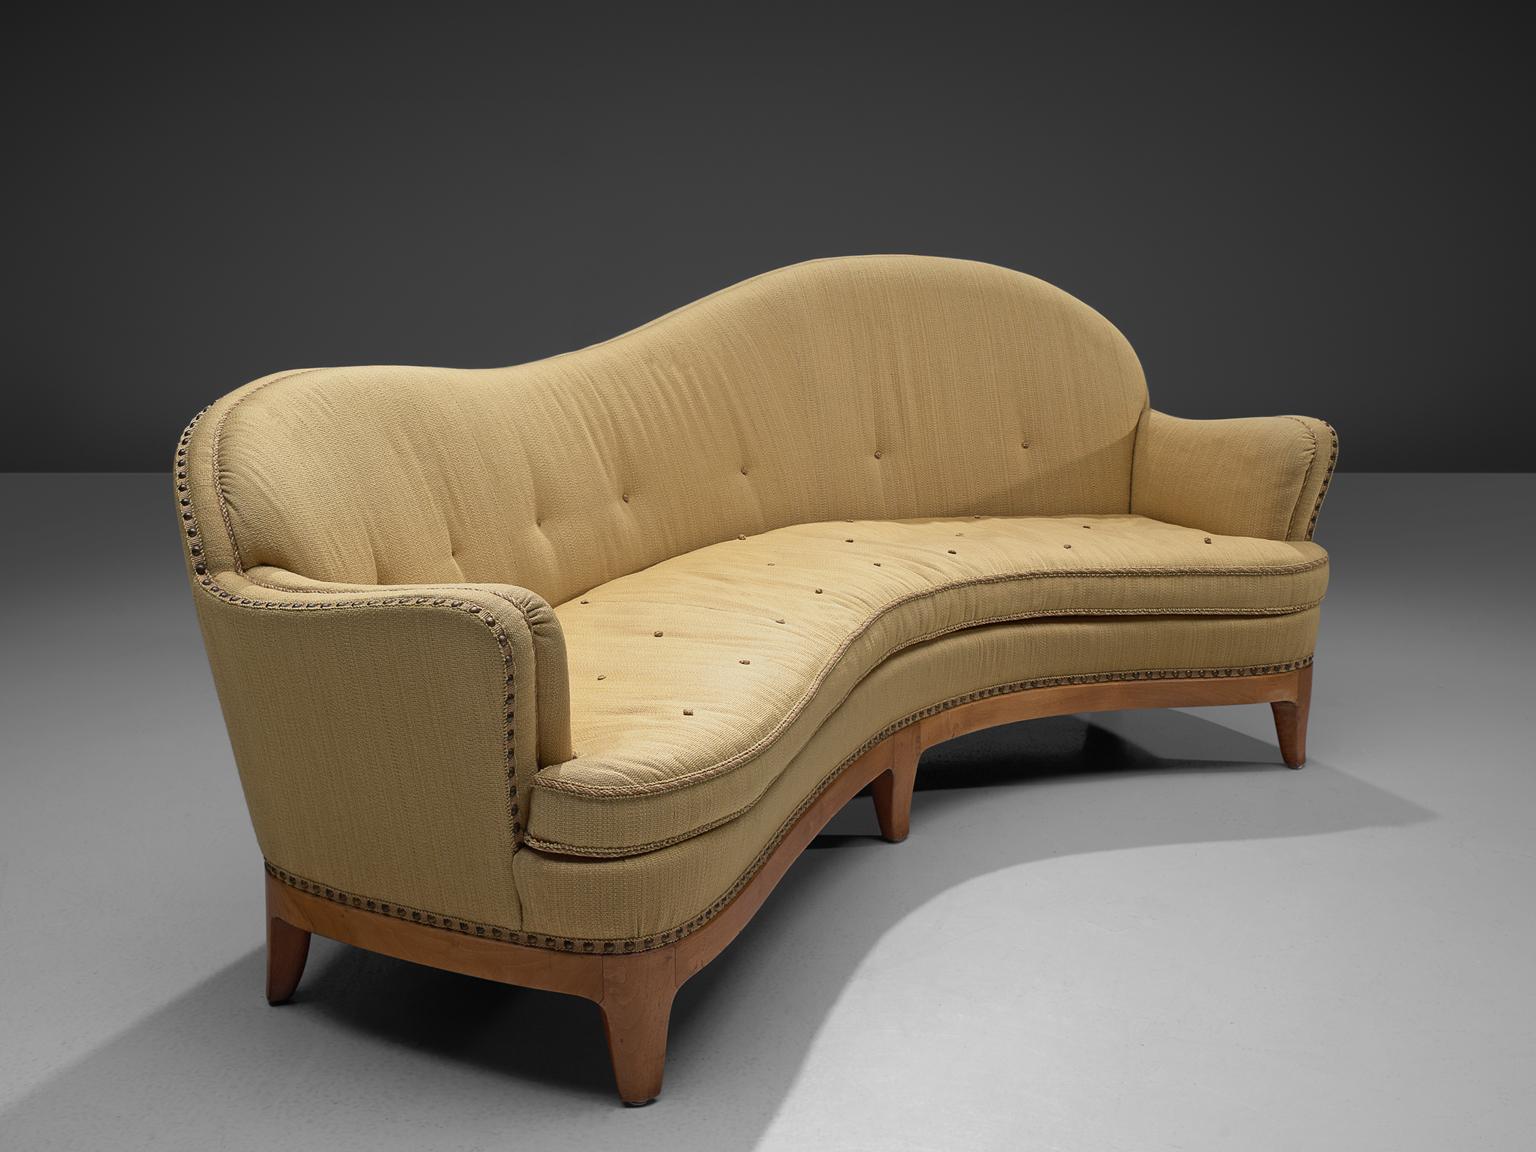 Curved sofa with stained beech frame and beige fabric, France, 1930s.

Extra-ordinary sofa from a French interior with an interesting interior. This sofa was probably custom-made for the family in the 1930s and features outstanding craftsmanship